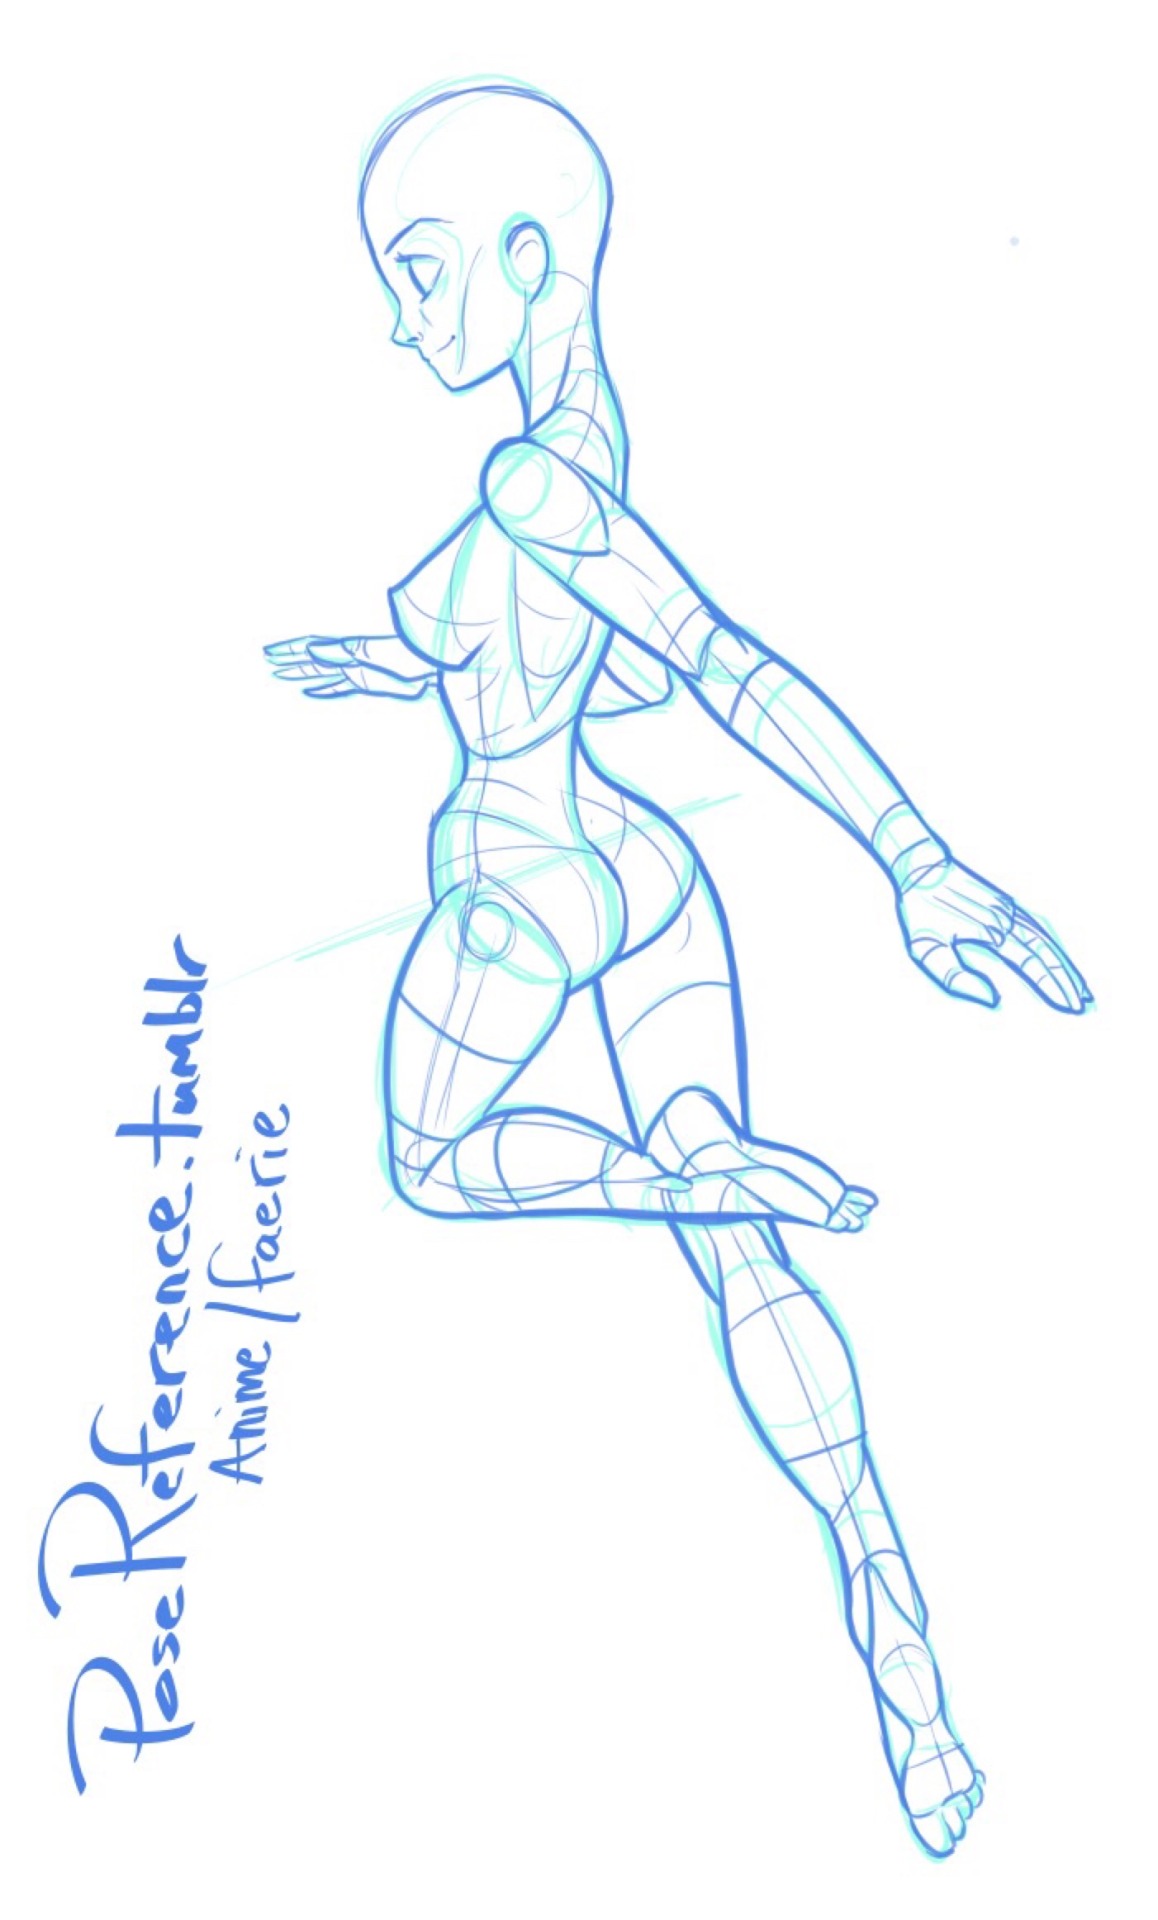 Drawing Superheroine Flying Poses for Comics - YouTube